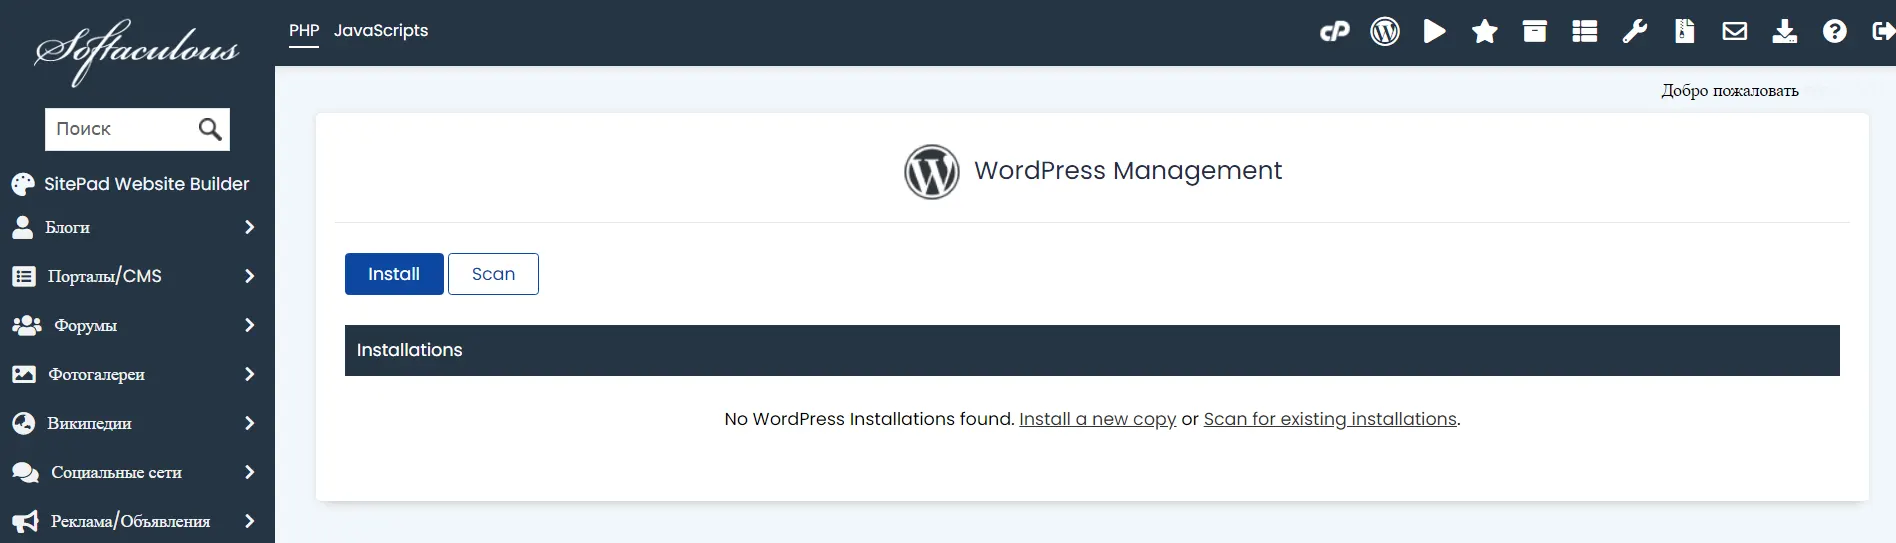 WP Manager by Softaculous